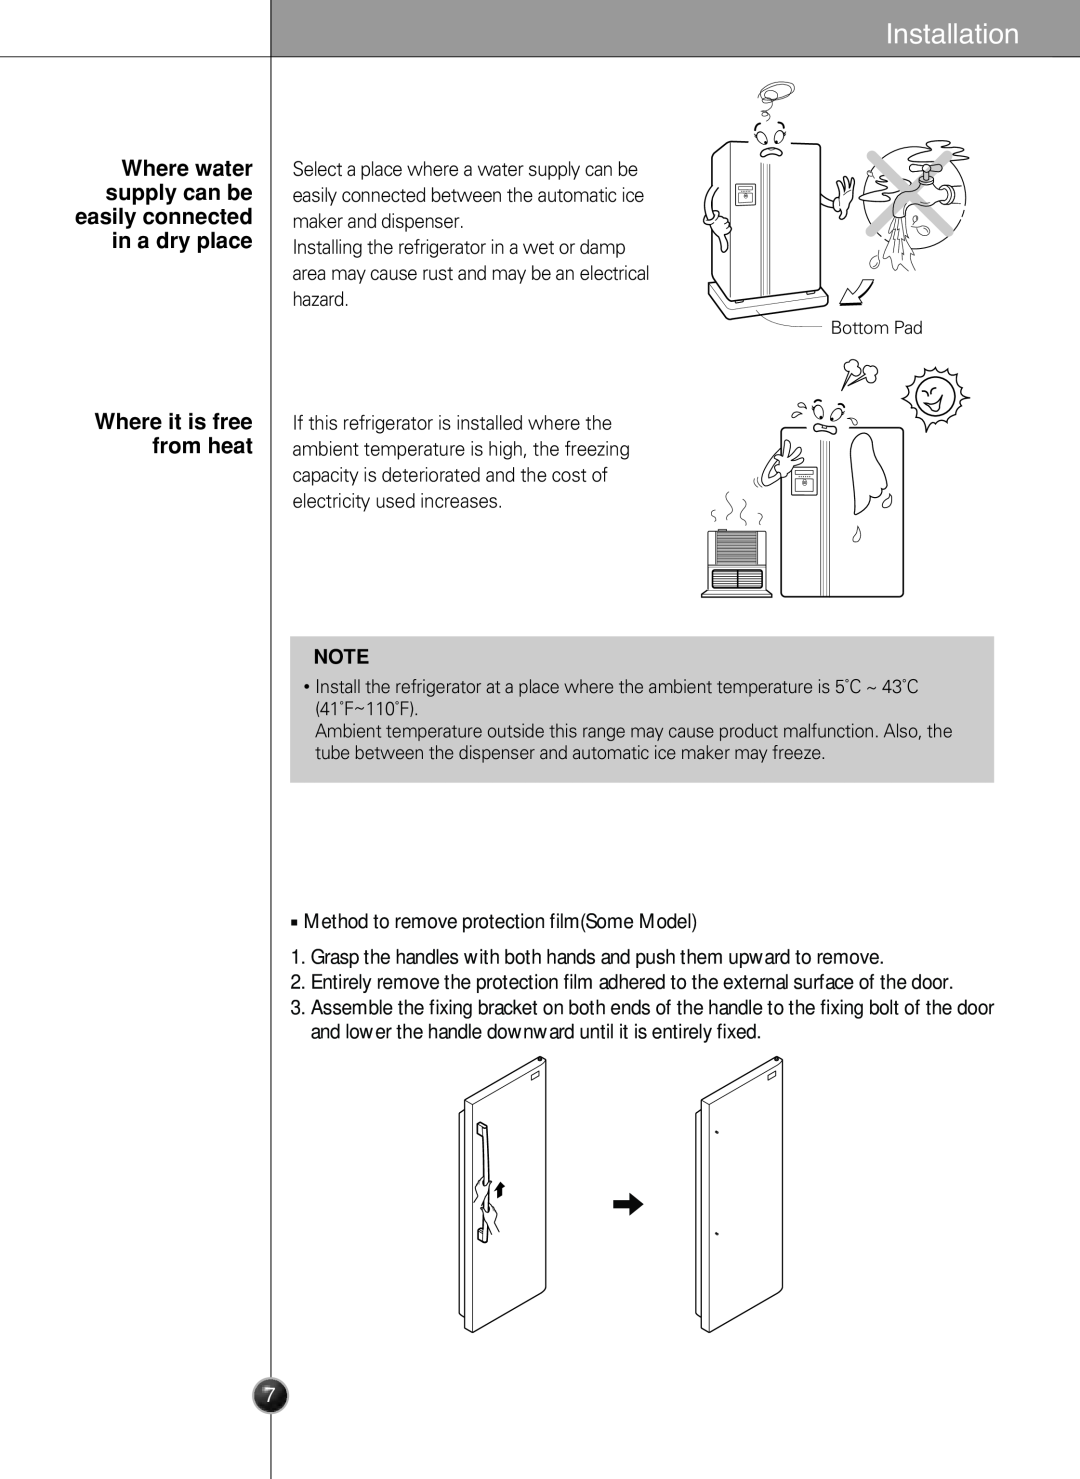 LG Electronics LSC26905 owner manual Installation, Where water supply can be easily connected in a dry place 